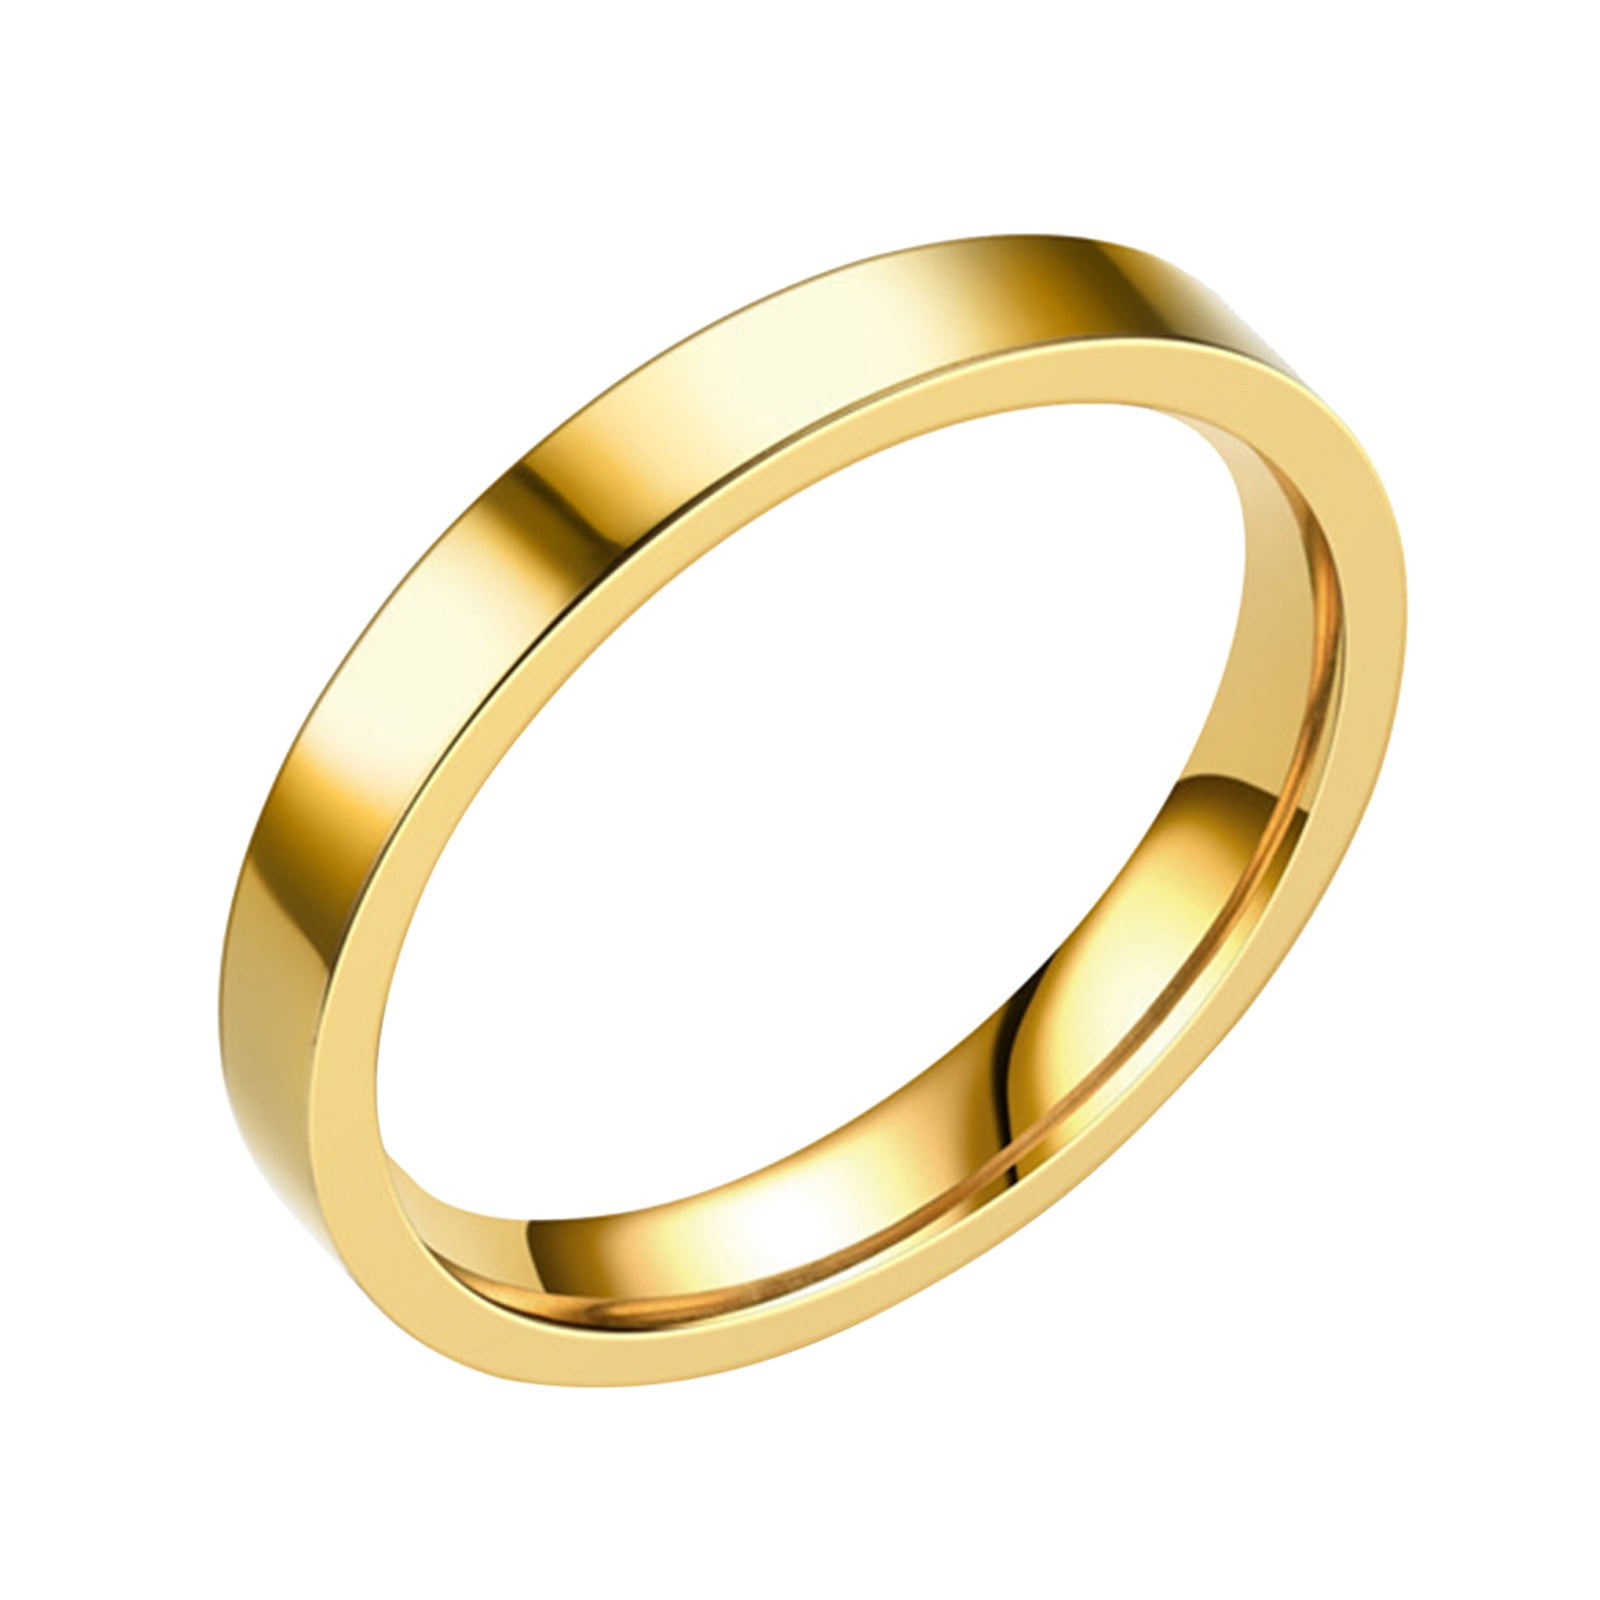 Buy Simple 14KT Yellow Gold and Diamond Men's Ring Online | ORRA